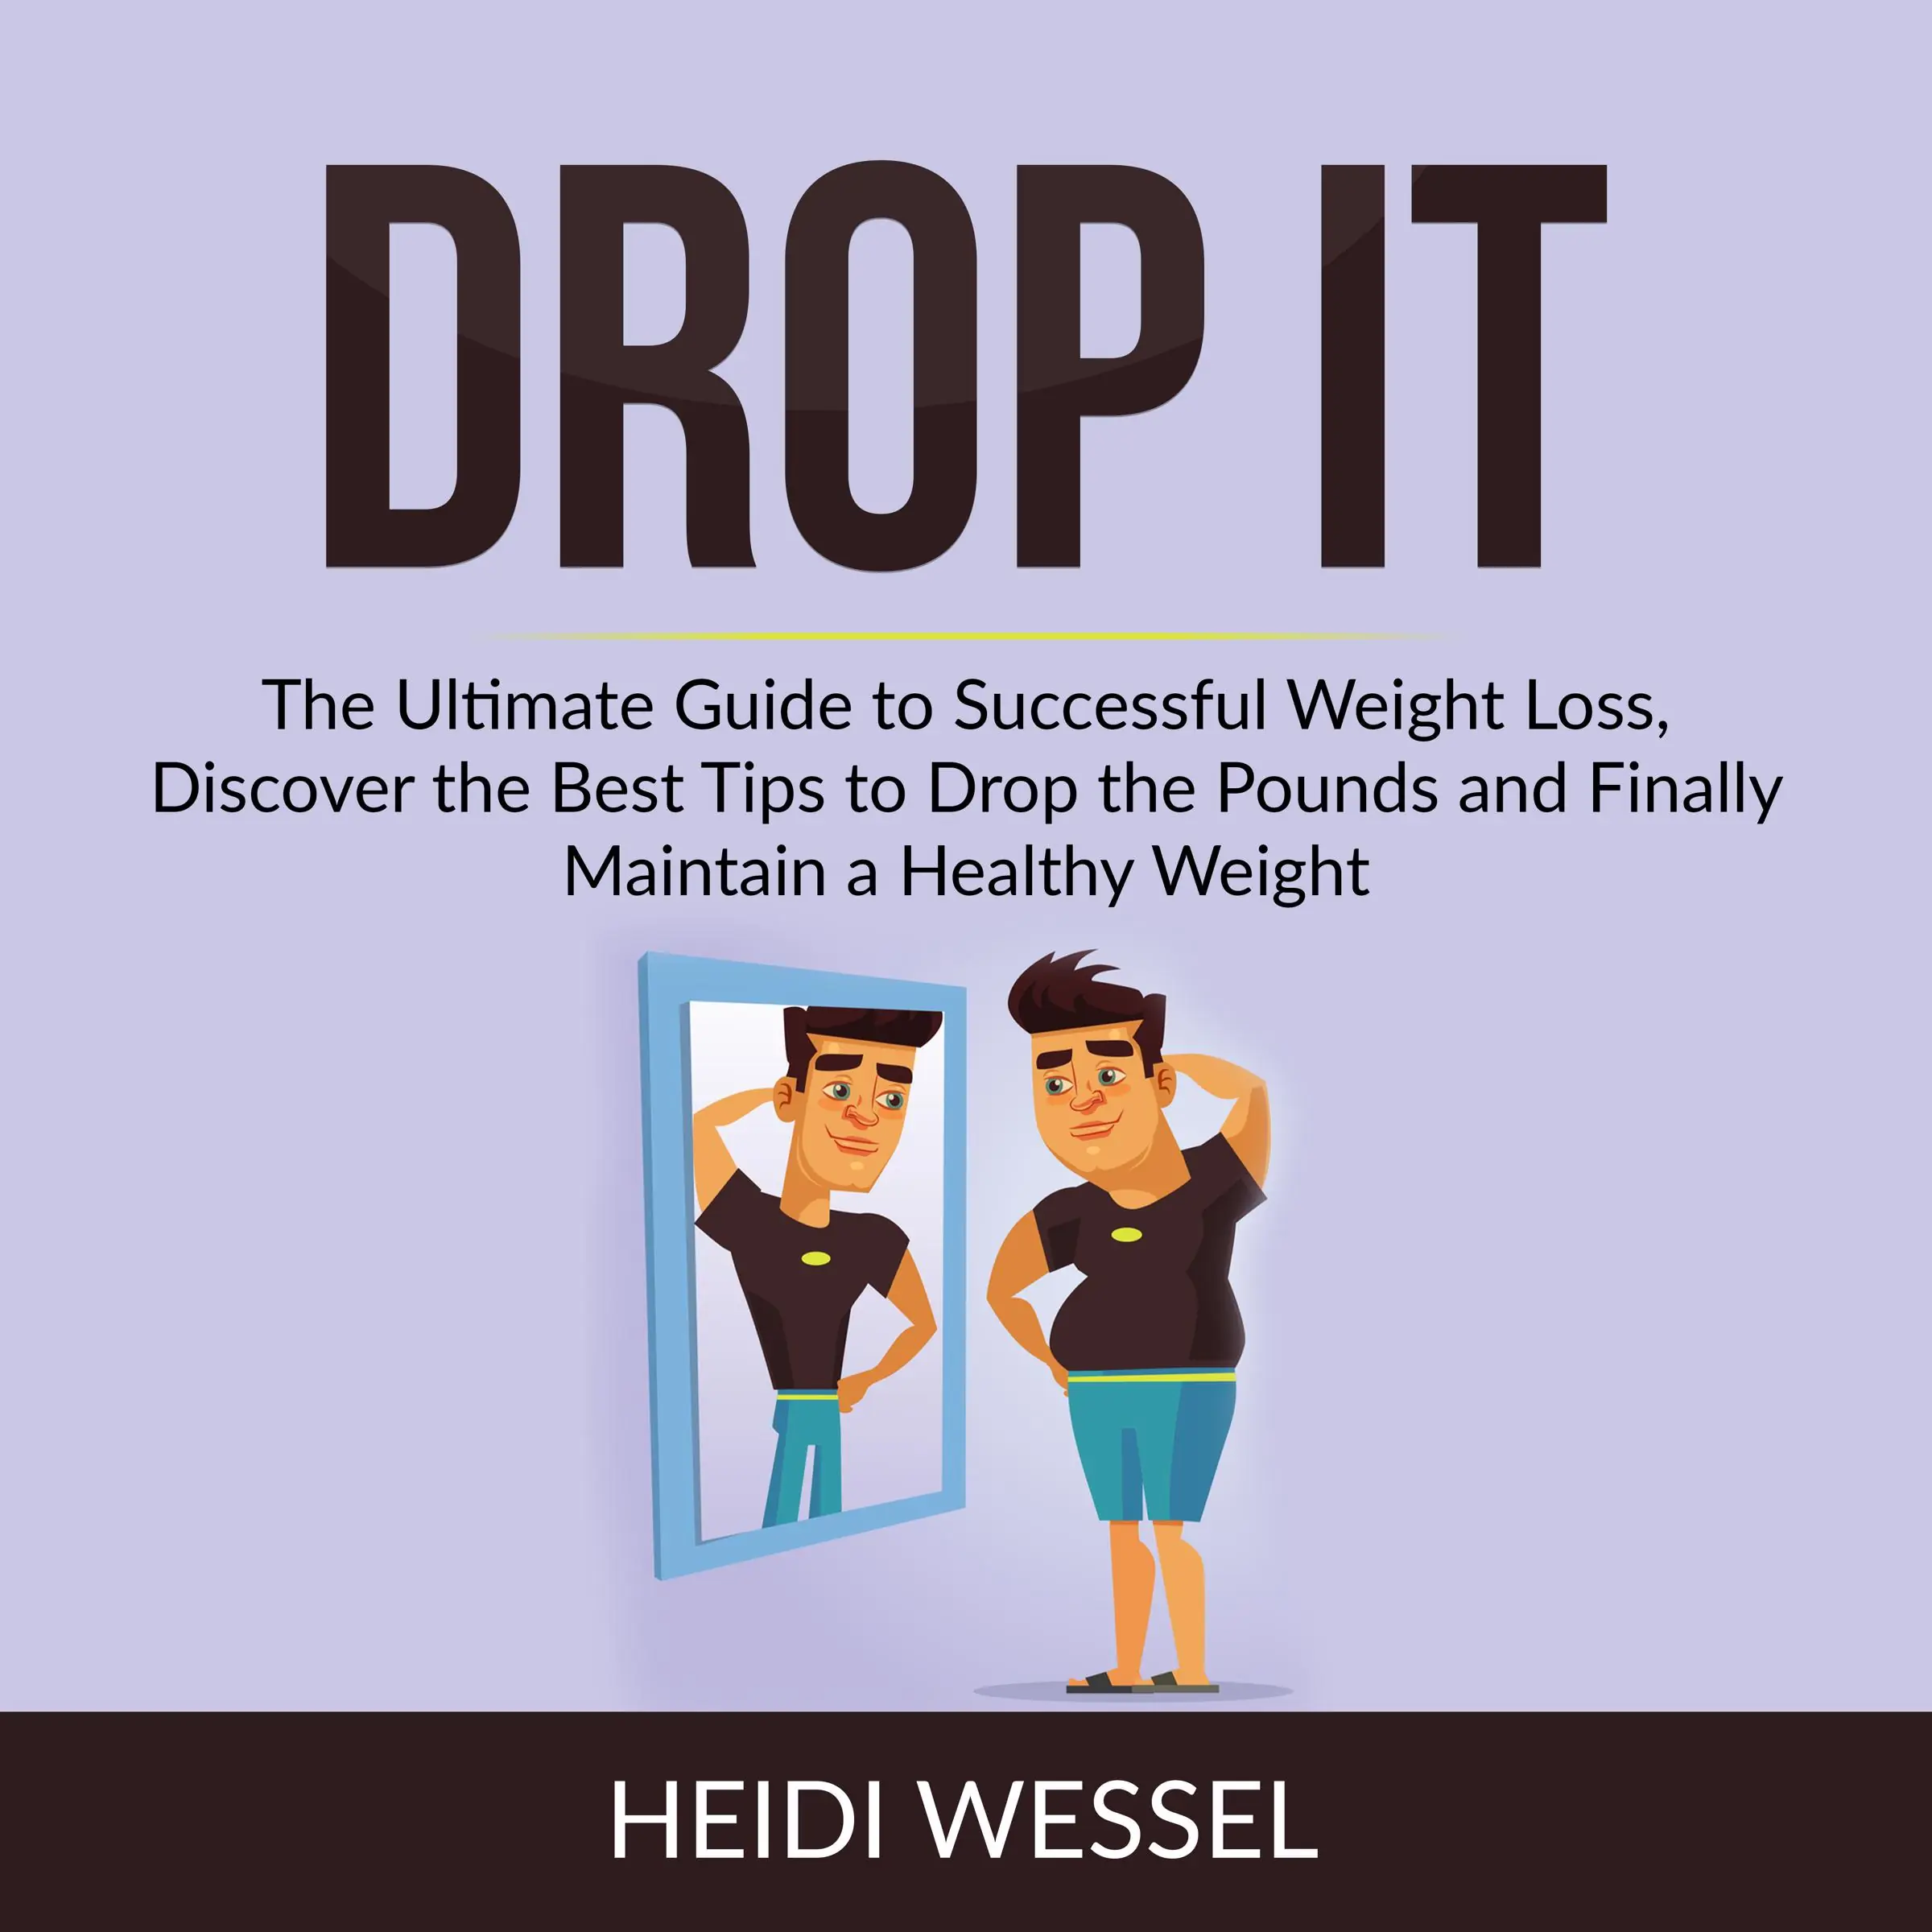 Drop It: The Ultimate Guide to Successful Weight Loss, Discover the Best Tips to Drop the Pounds and Finally Maintain a Healthy Weight Audiobook by Heidi Wessel